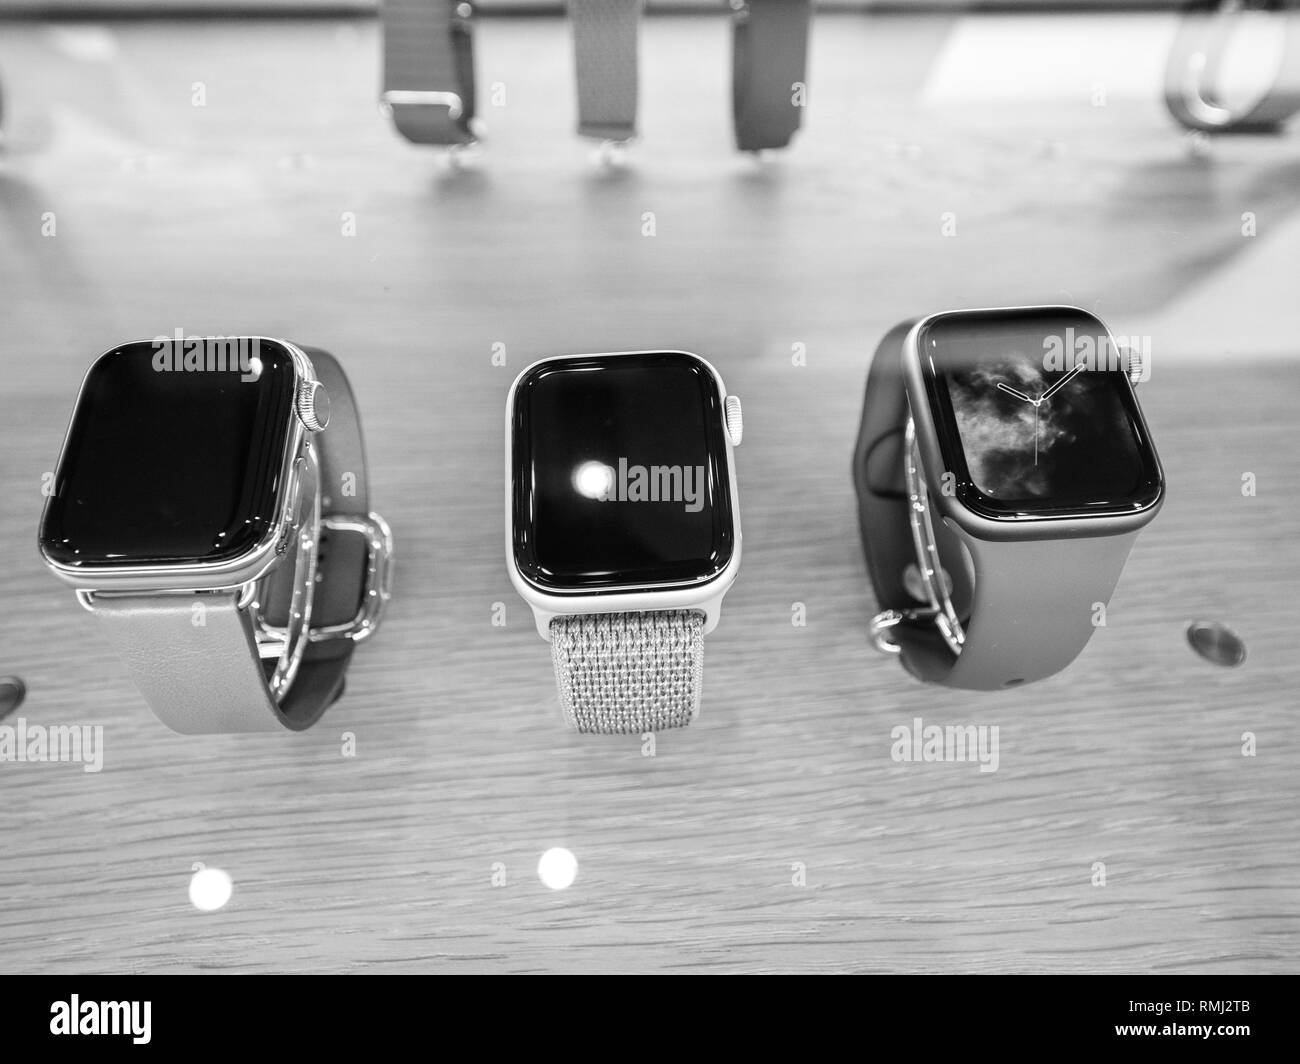 STRASBOURG, FRANCE - SEP 21, 2018: Apple Store the new latest Apple Watch Series 4 wearable personal luxury watch - black and white above view  Stock Photo